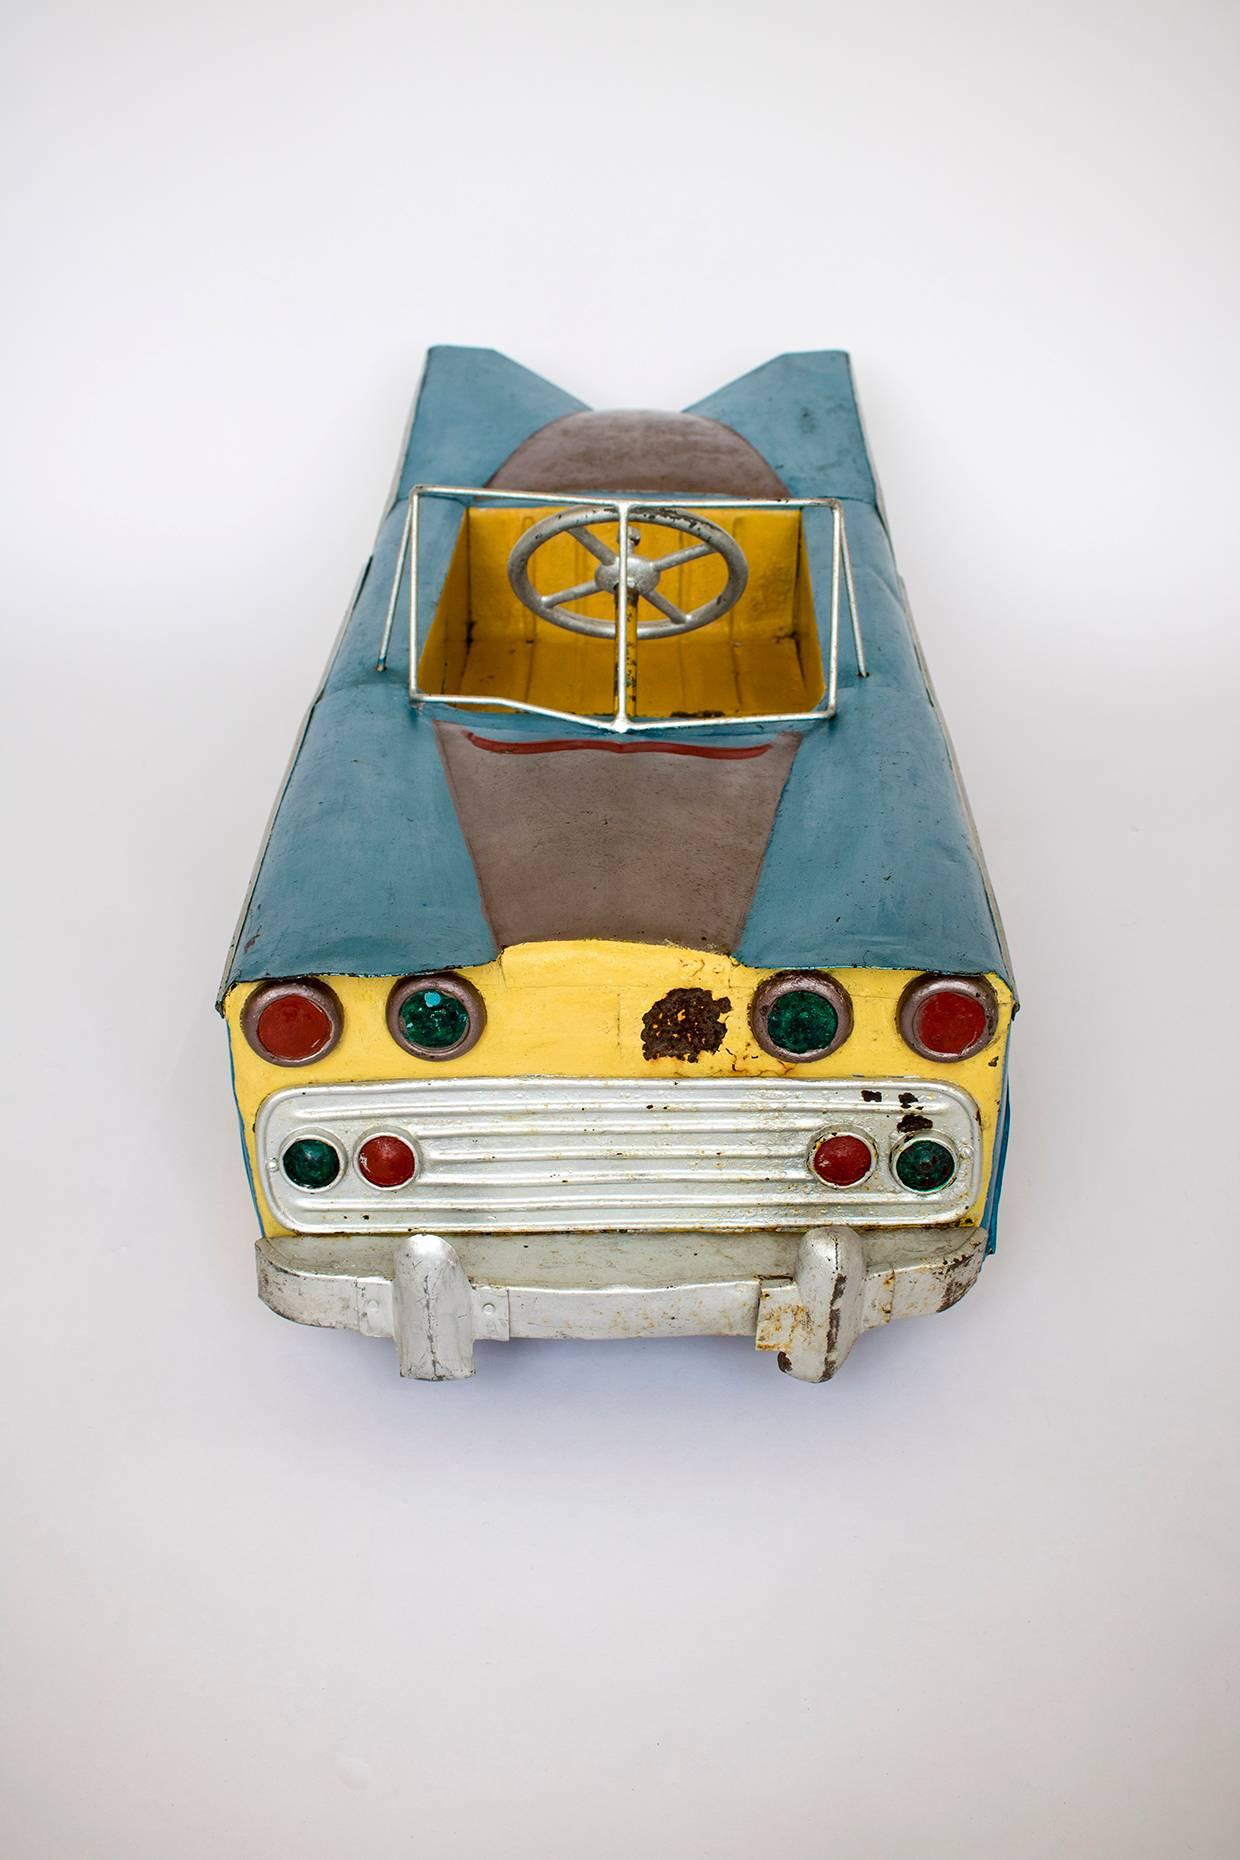 Unusual Burmese Painted Model Pedal Car, circa 1950s -1960s Childs Toy For Sale 1